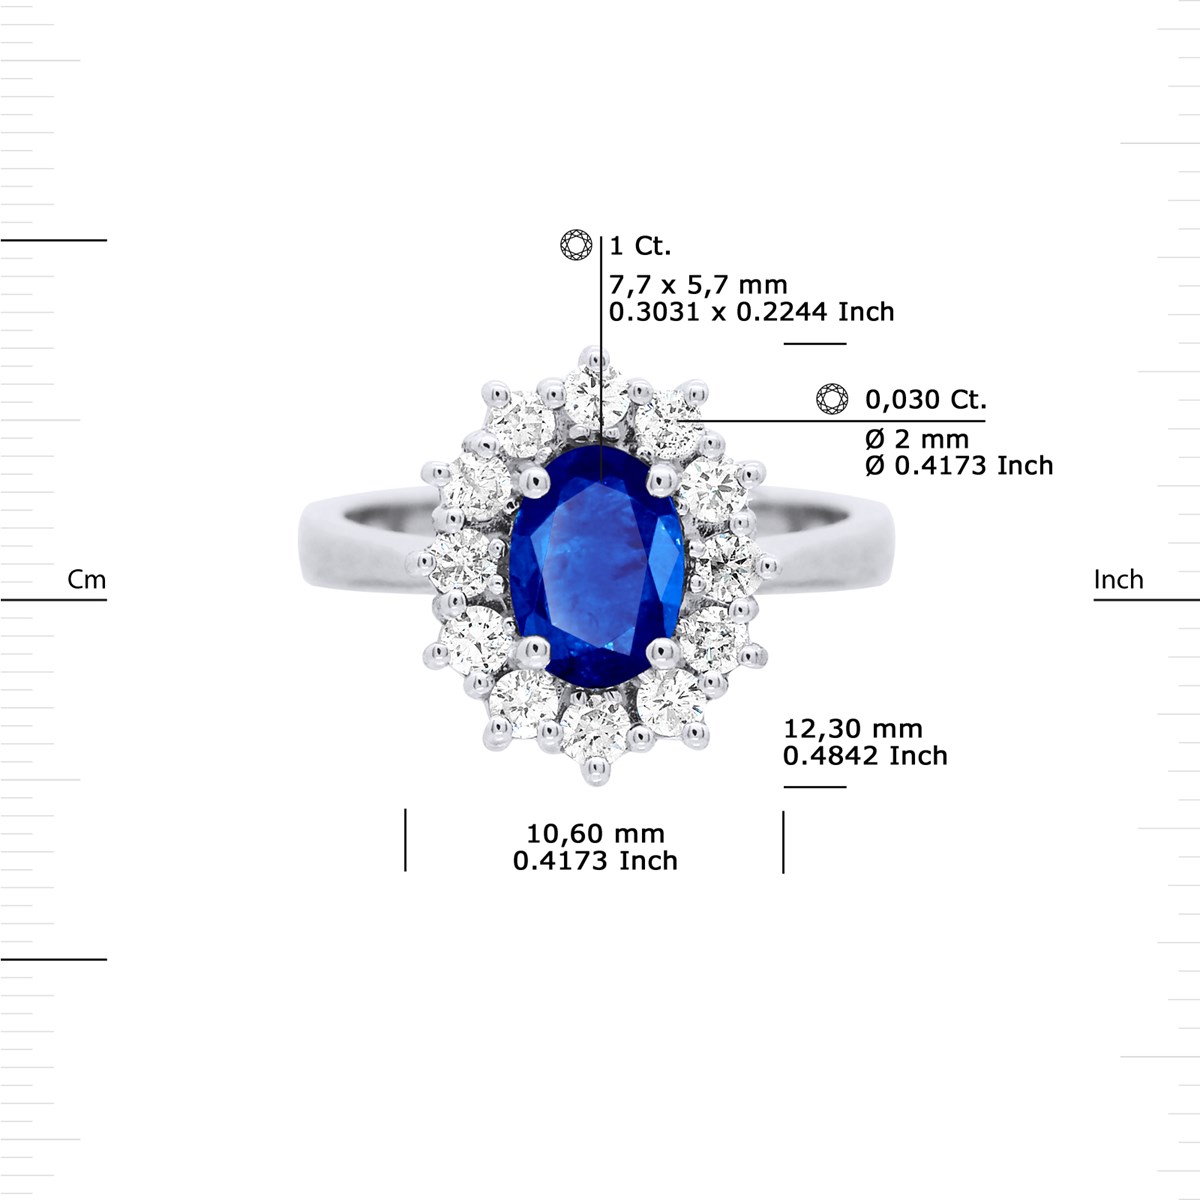 Bague Marquise SAPHIR 1 Ct Diamants 0,36 Cts Or Blanc 18 Carats - vue 3